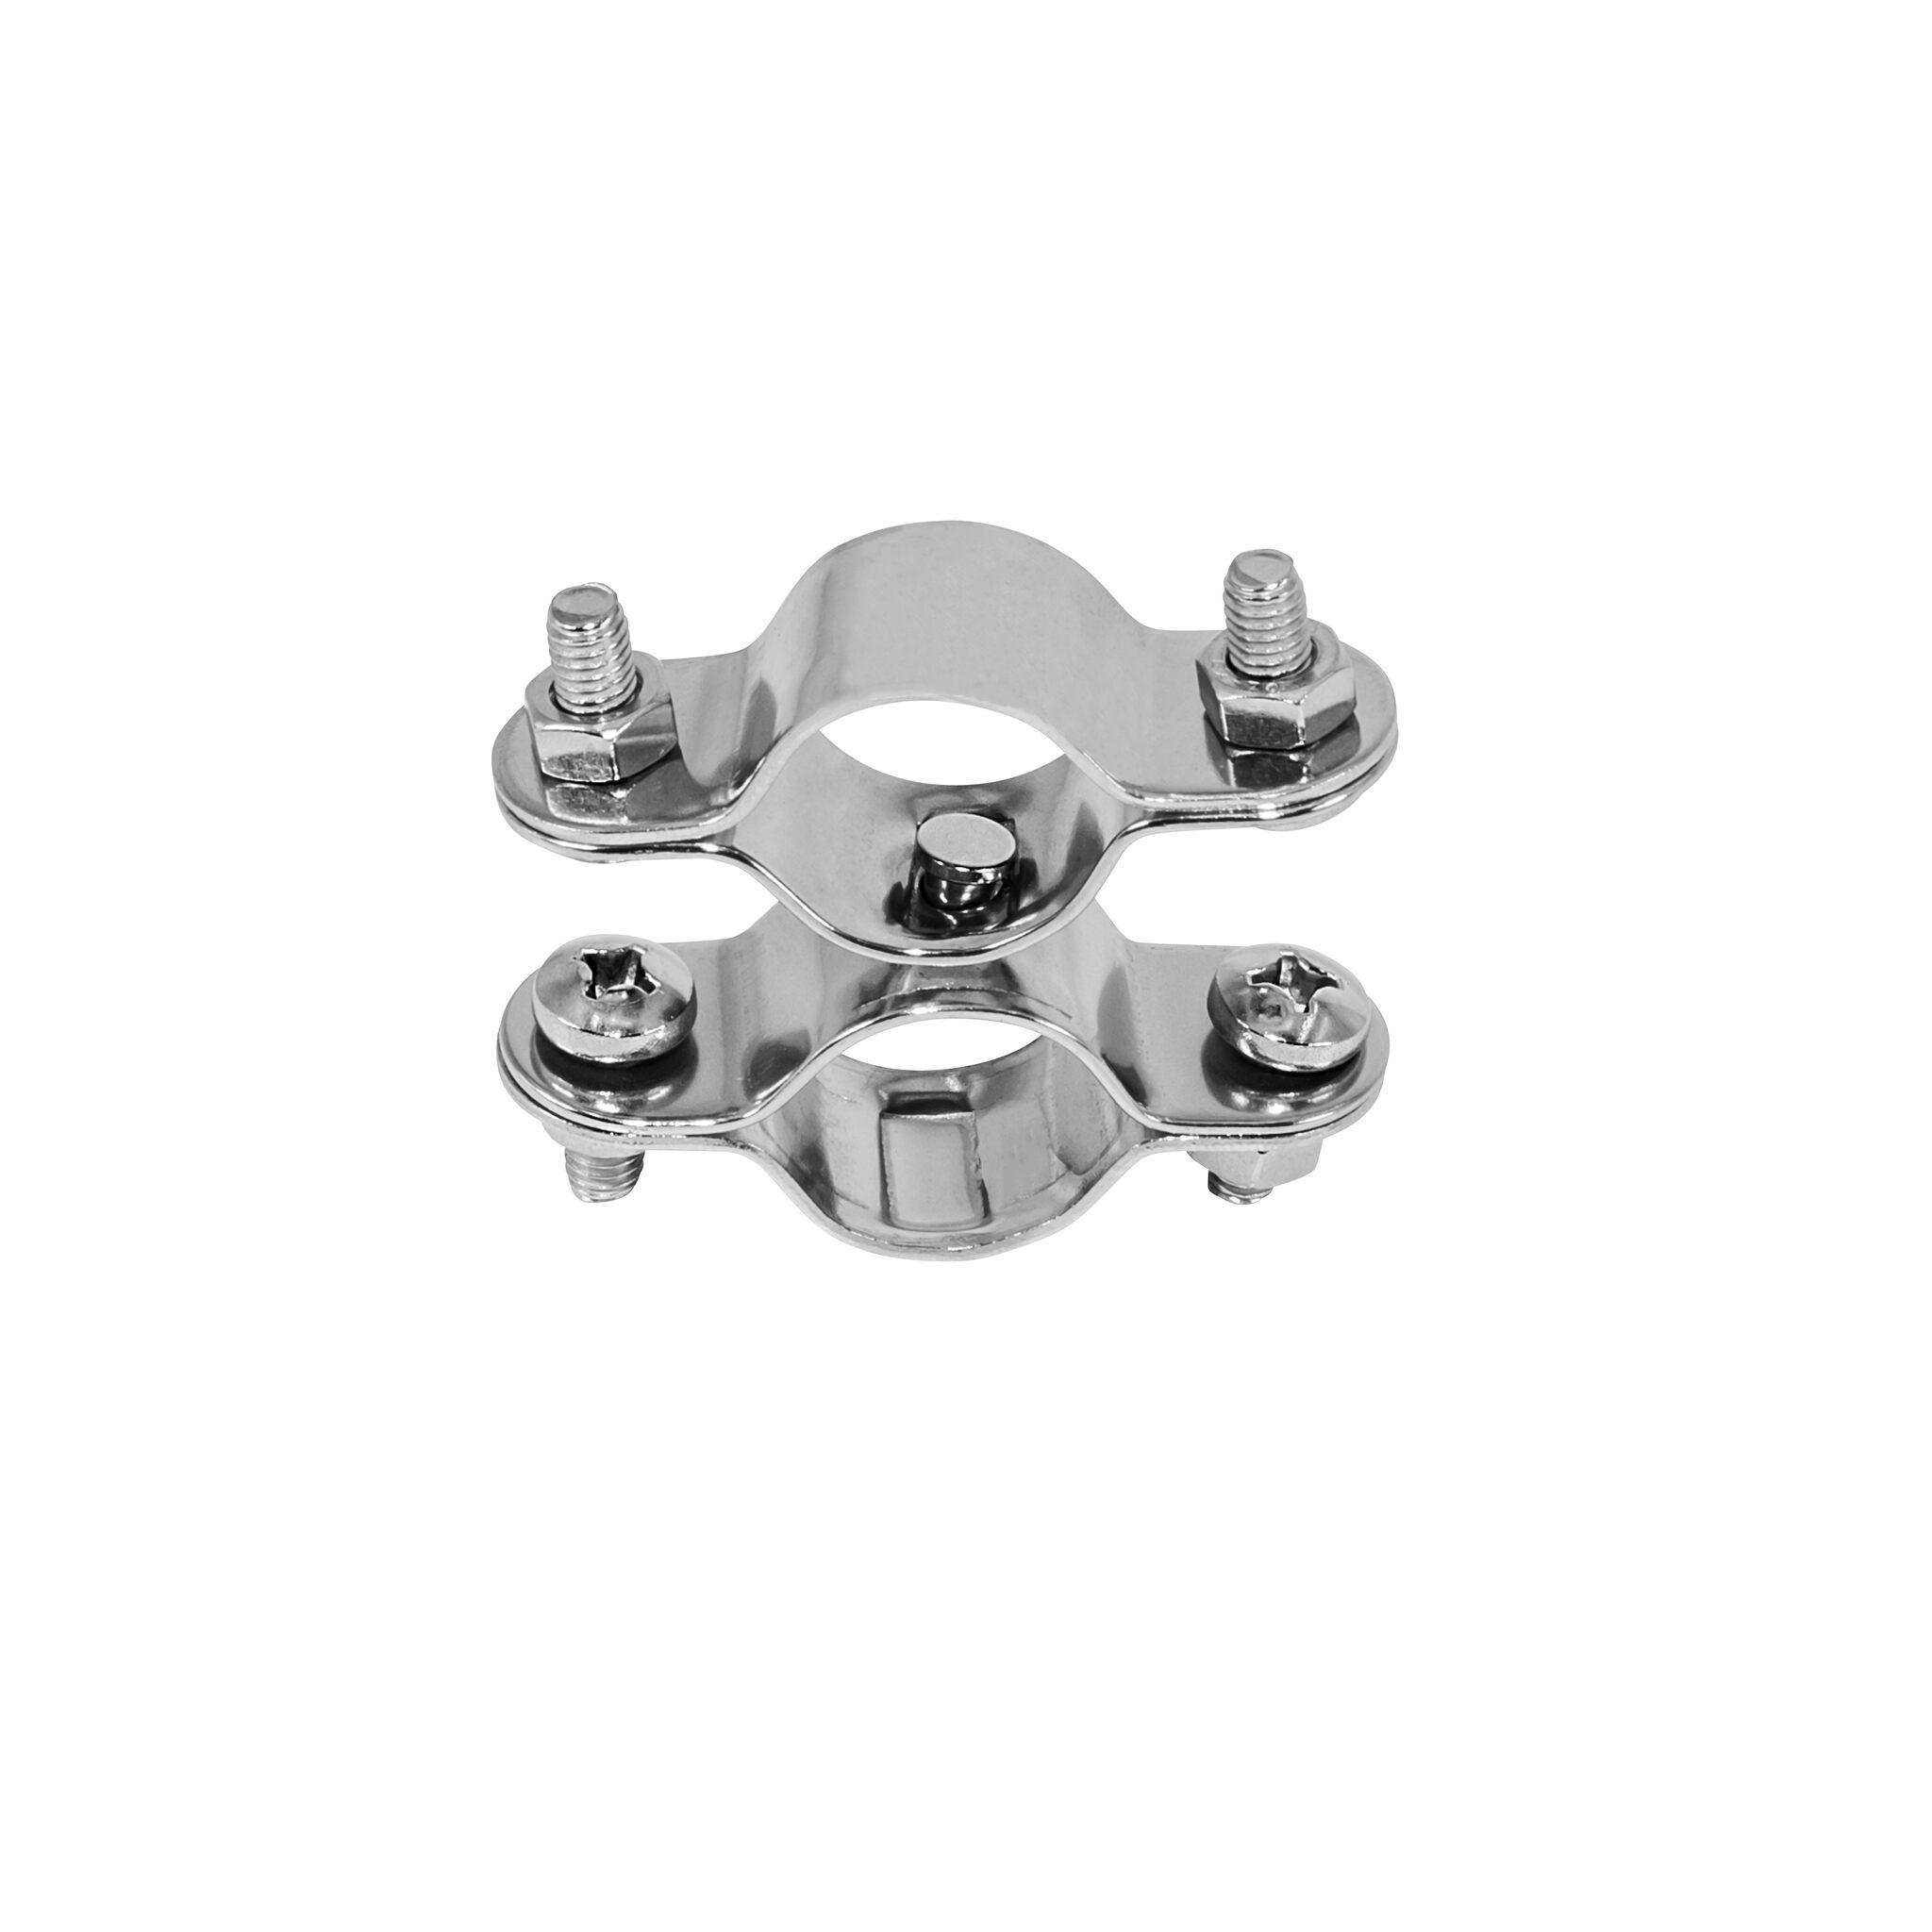 Swivel double clamp for 25 mm pipes